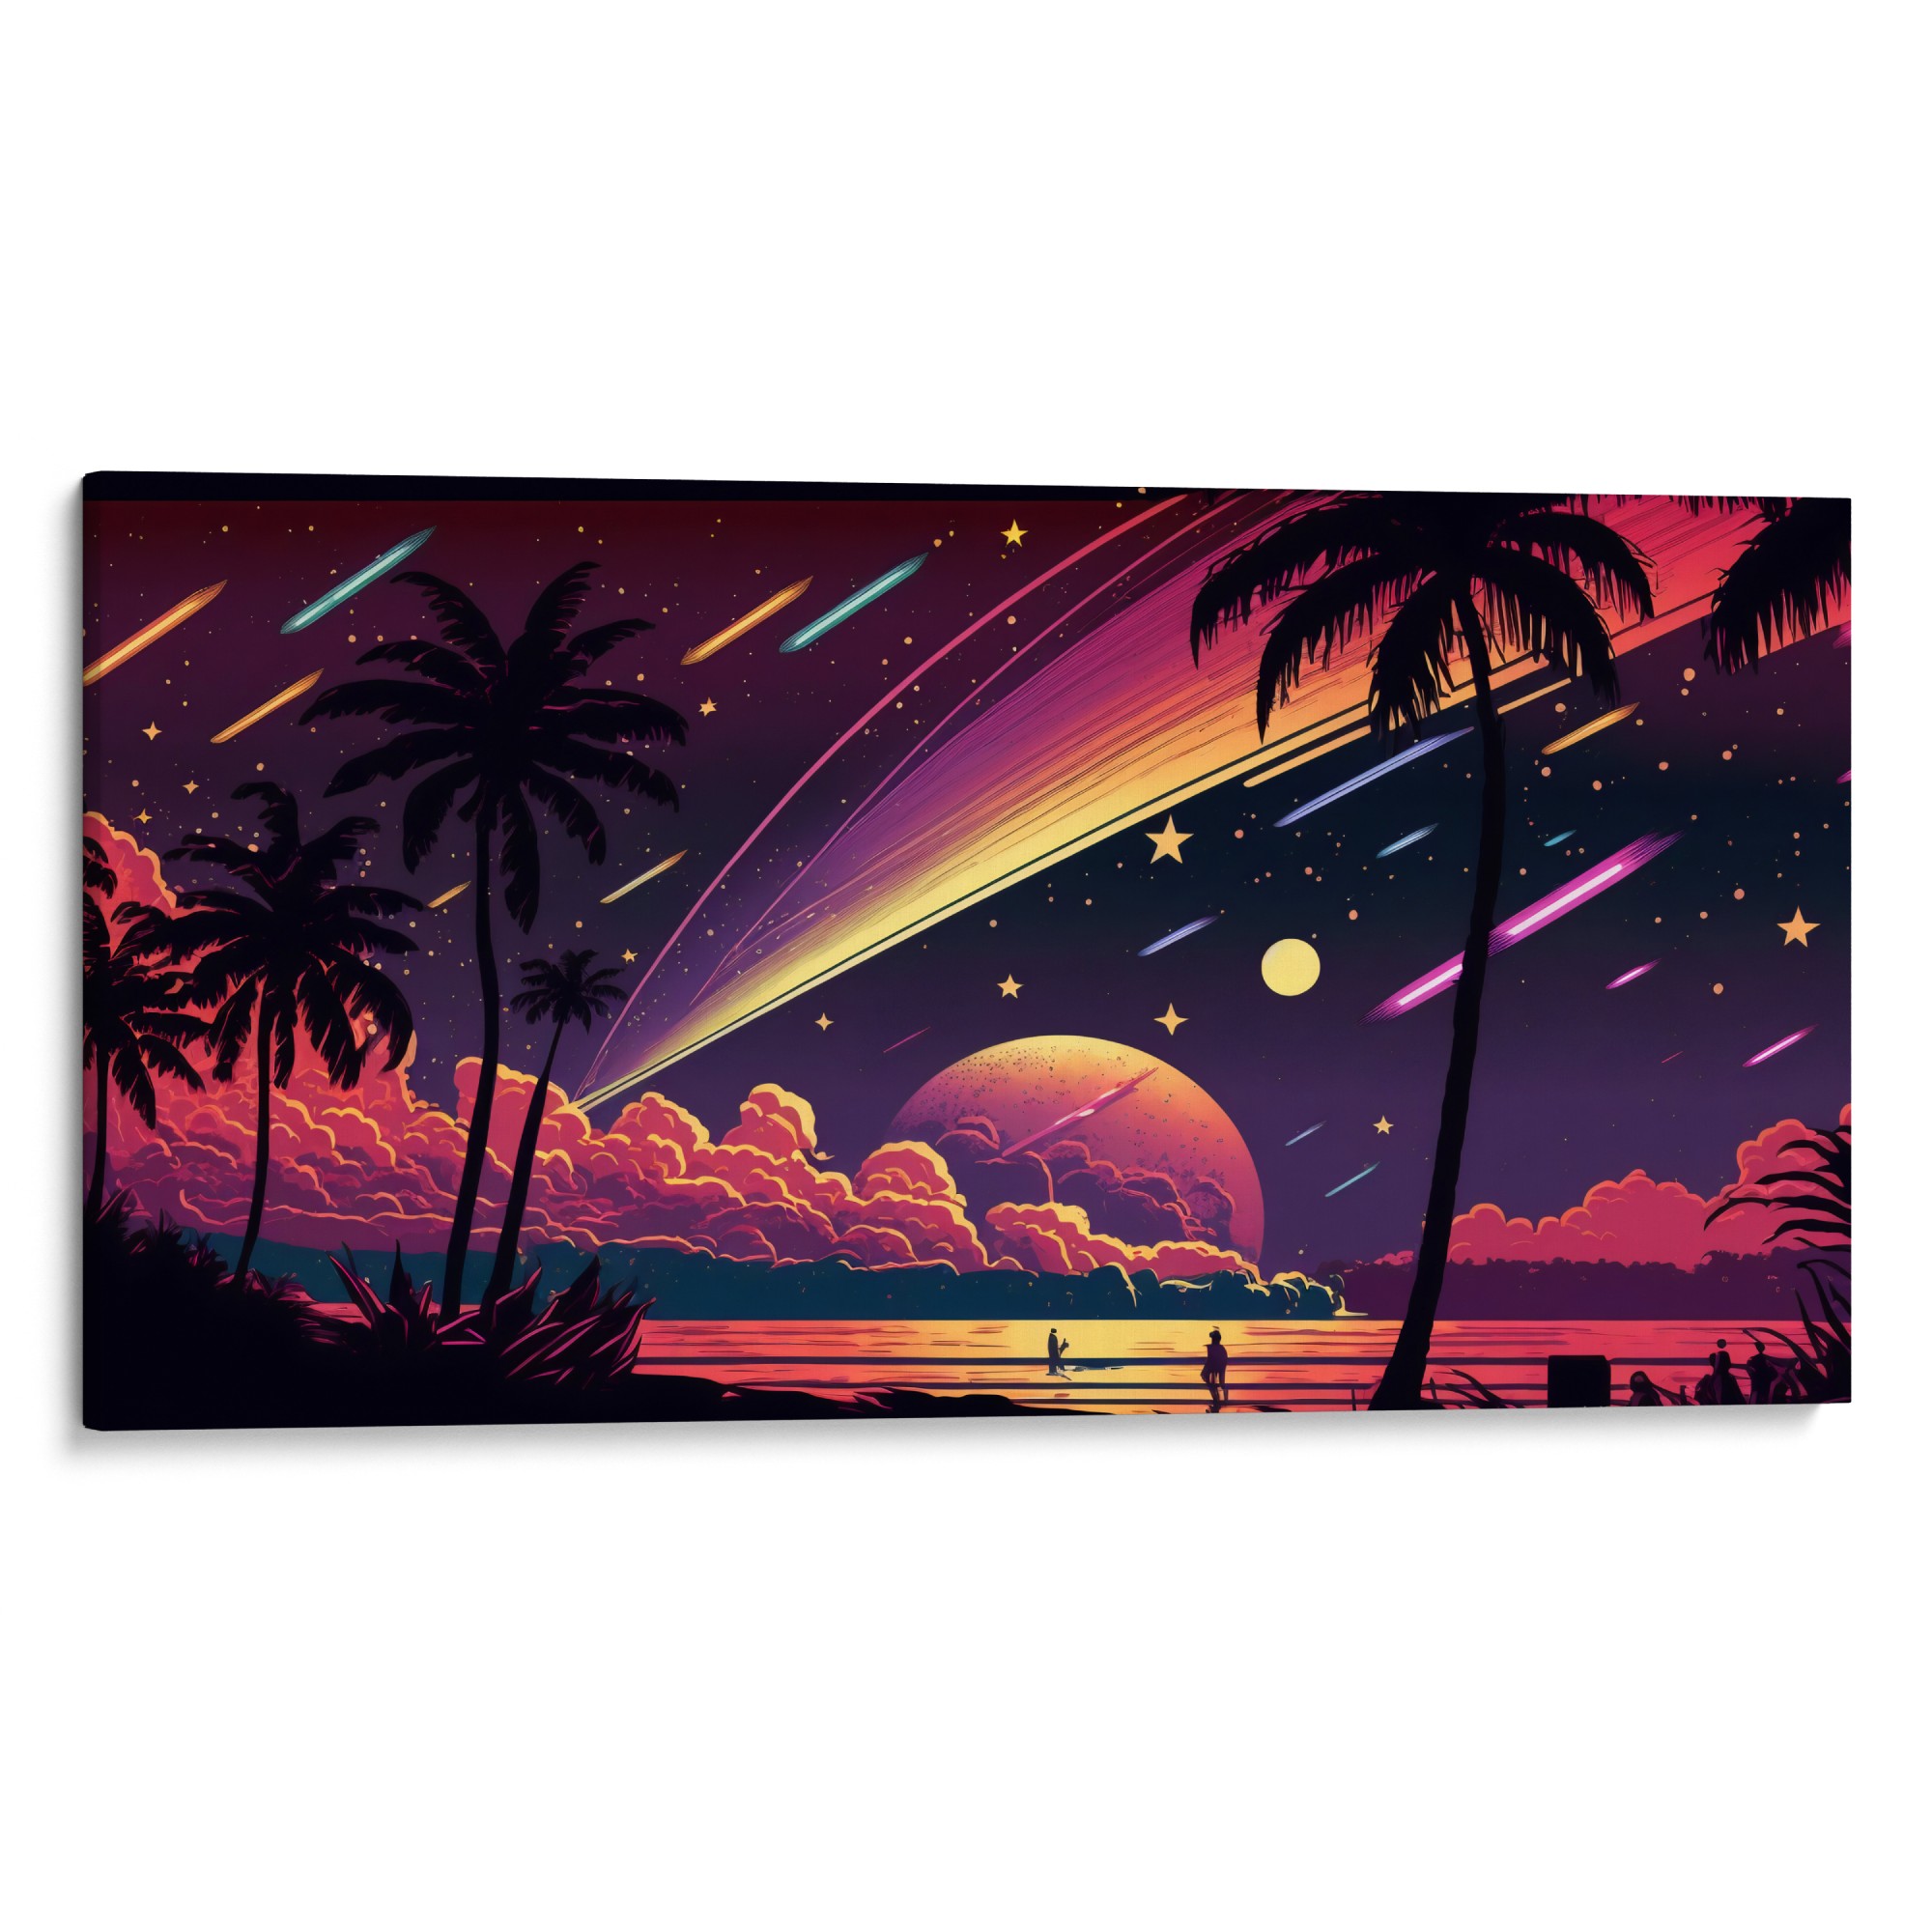 UNREAL HORIZON Limited Edition Canvas - Dreamy allure and astral splendor, exclusively at Koh Chang Art Studio.